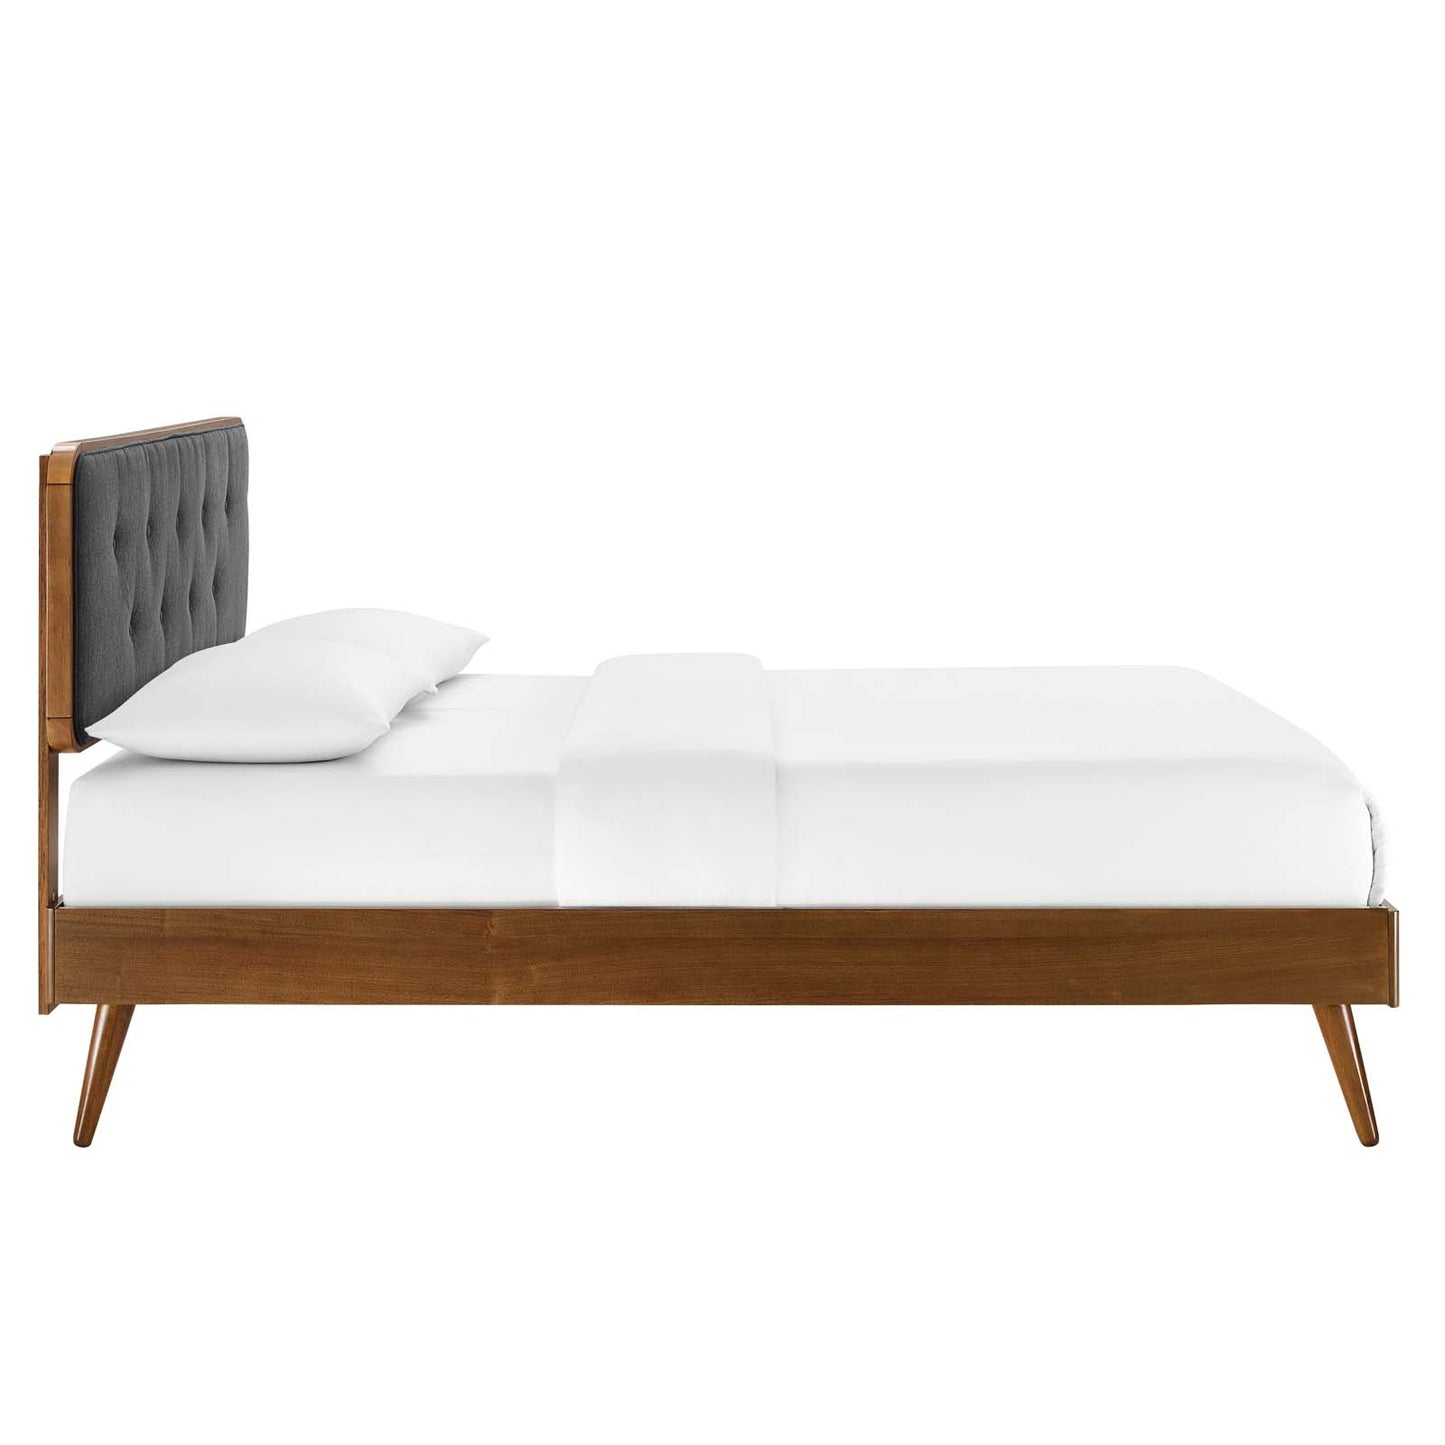 Bridgette Queen Wood Platform Bed With Splayed Legs Walnut Charcoal MOD-6388-WAL-CHA